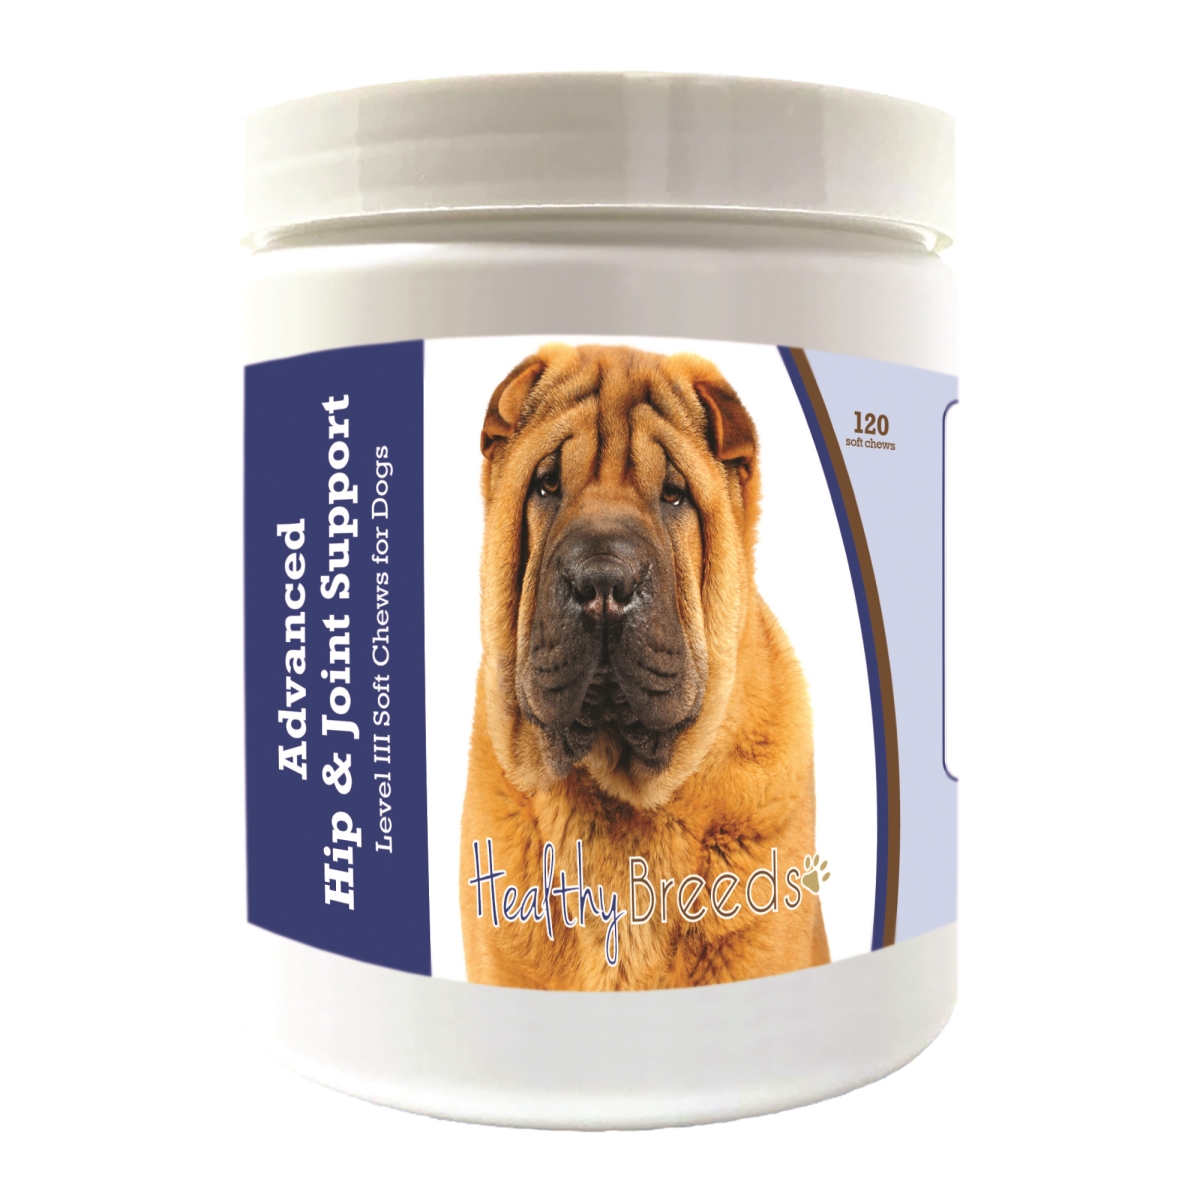 Picture of Healthy Breeds 192959898026 Chinese Shar Pei Advanced Hip & Joint Support Level III Soft Chews for Dogs